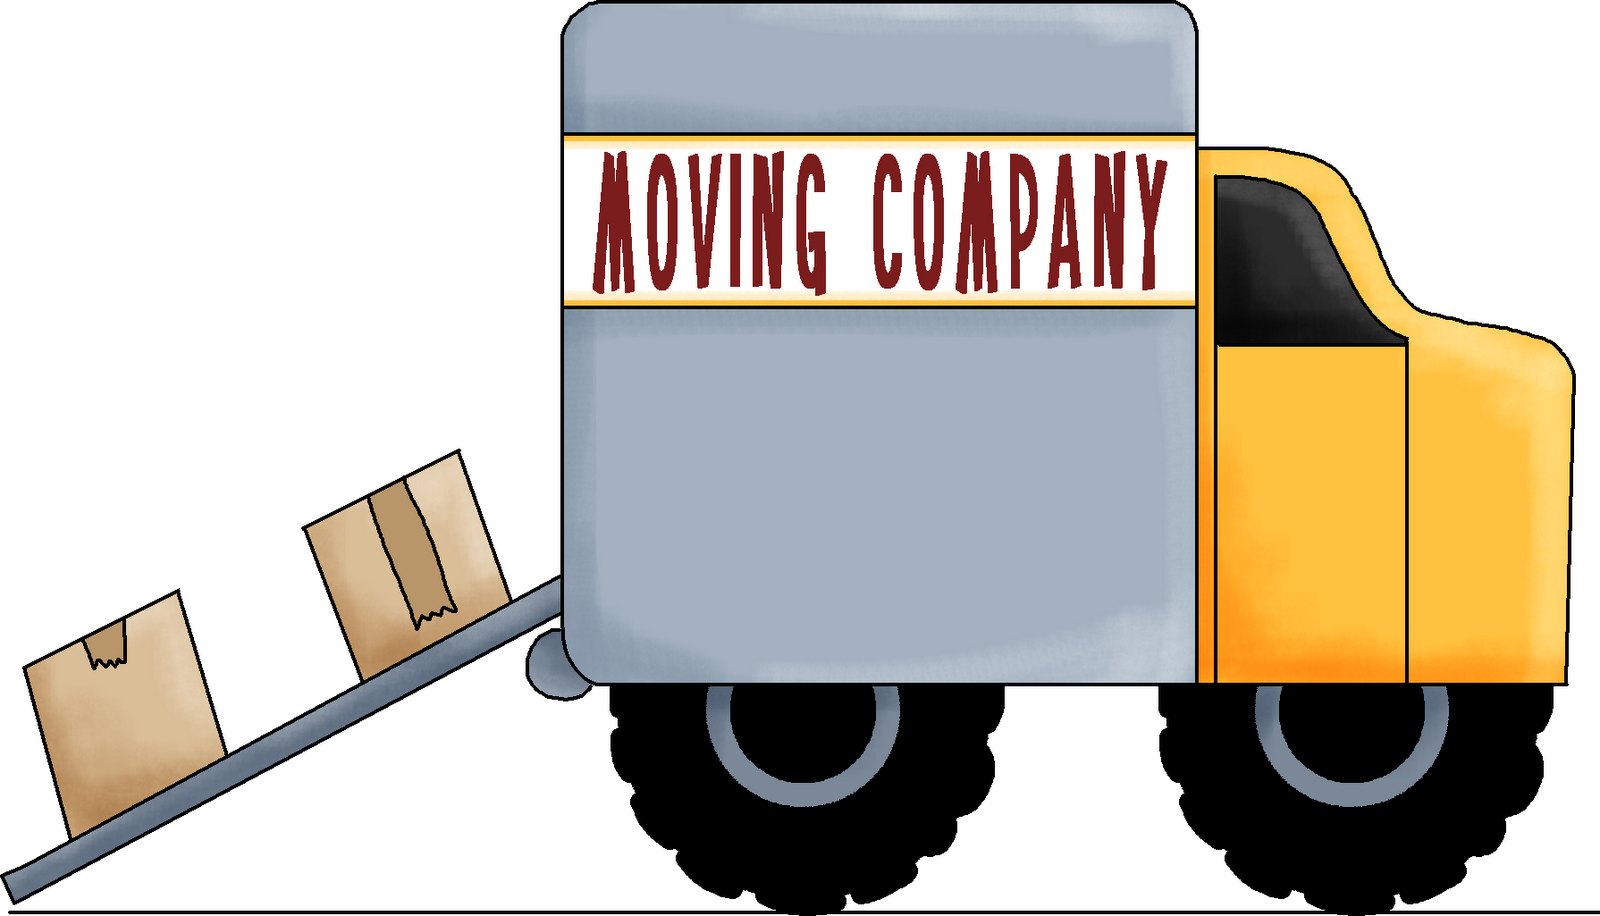 Download - Moving Company (1600x916)